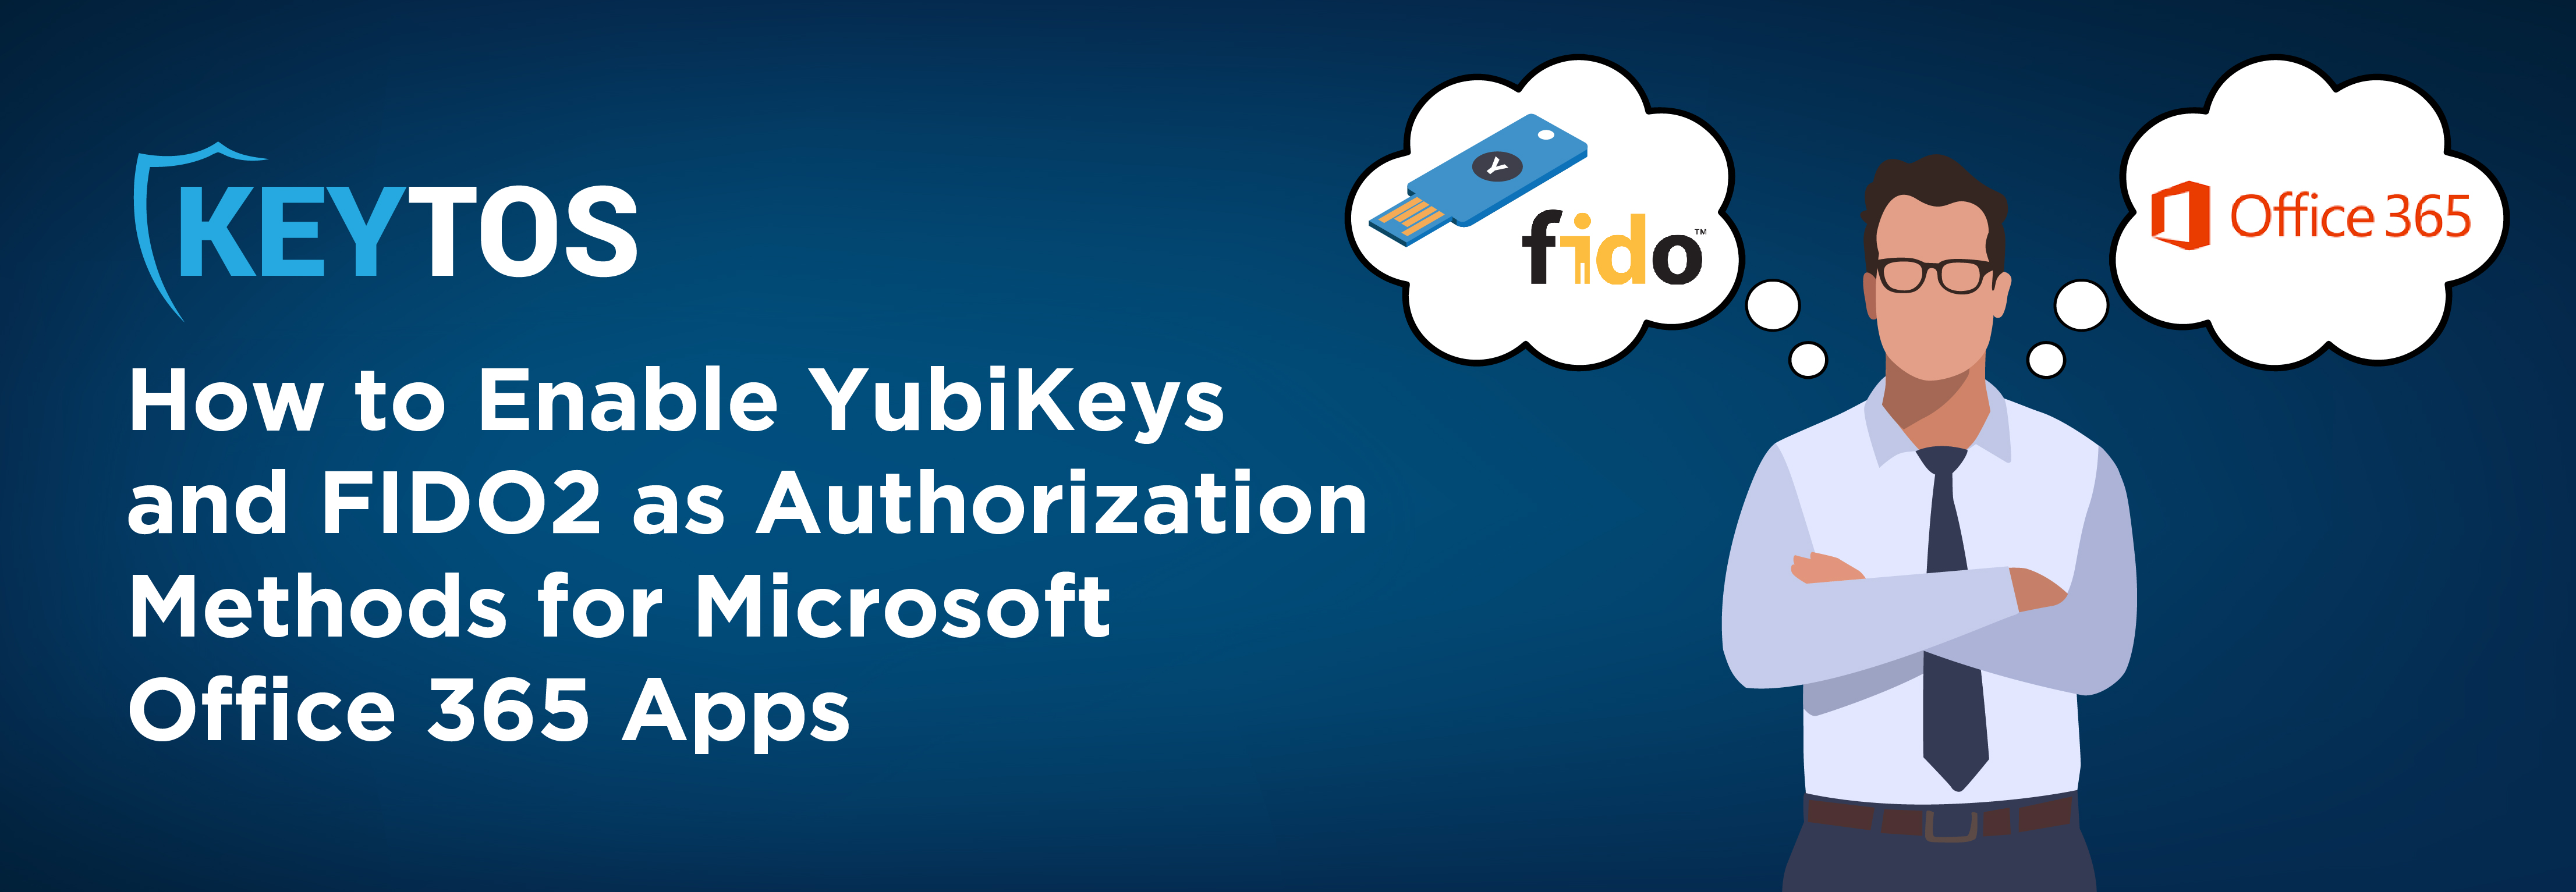 How to Enable YubiKeys and FIDO2 as Auth Methods for MS Office 365 Apps